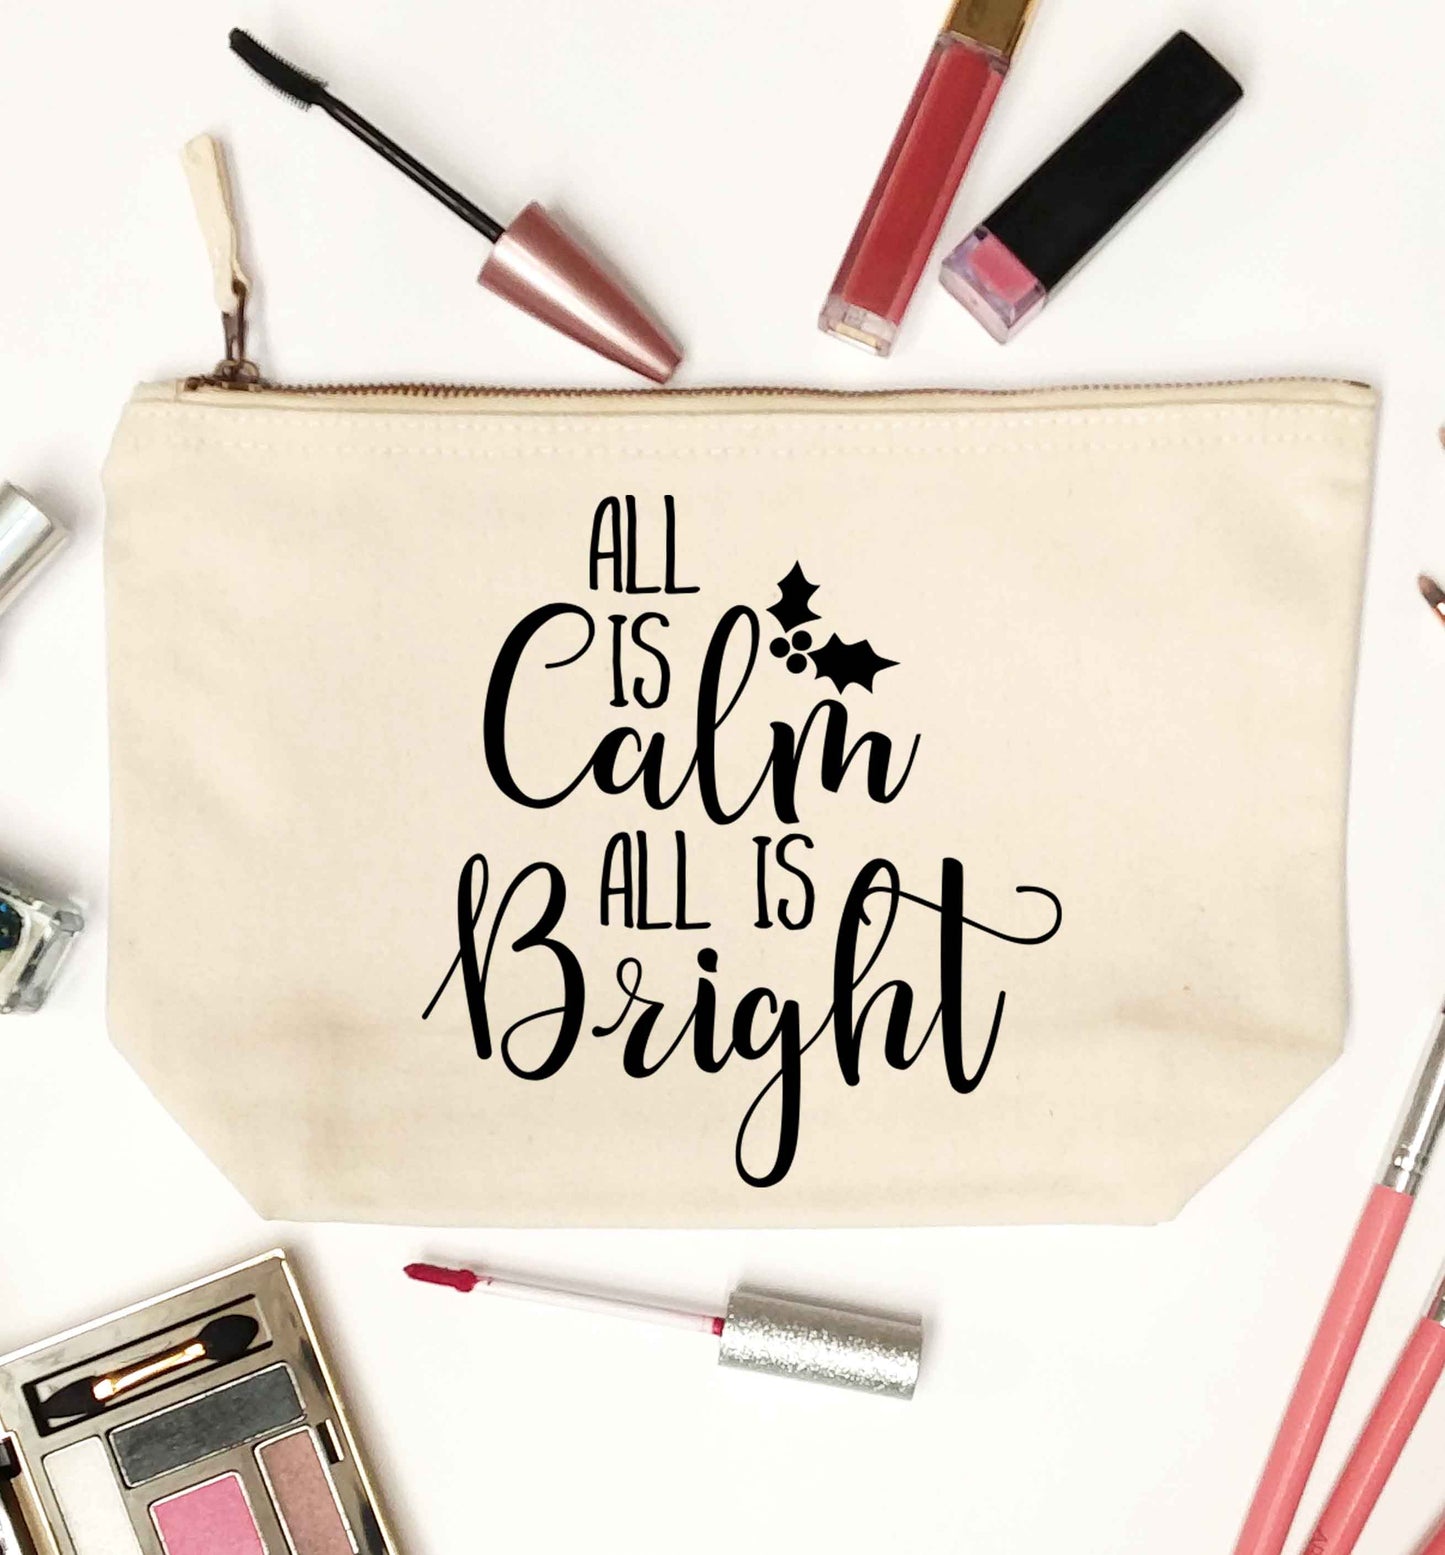 All is calm is bright natural makeup bag